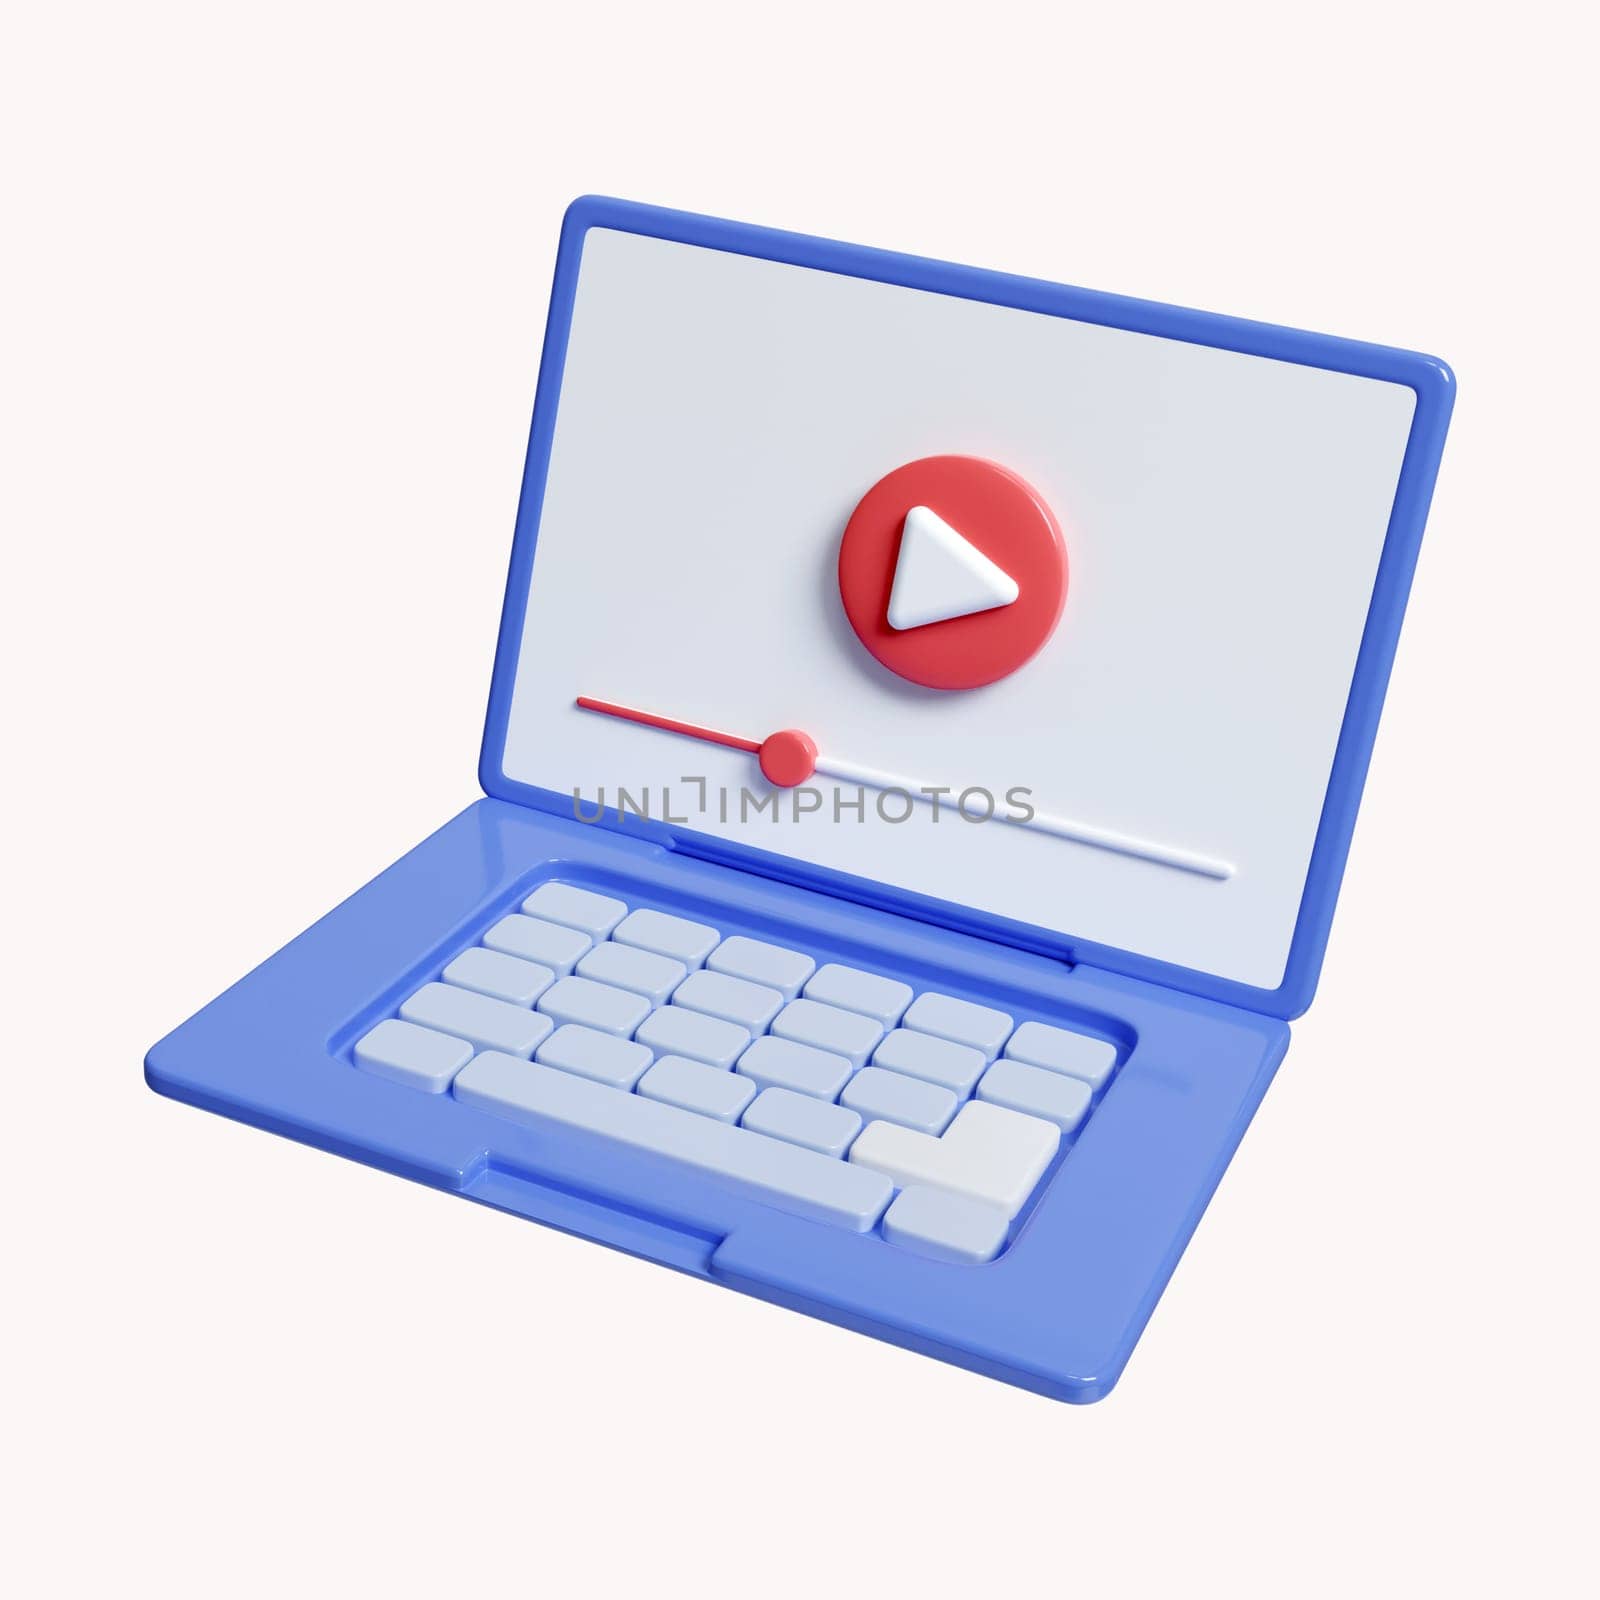 3d Video player. Video service, player app. Online cinema player. icon isolated on white background. 3d rendering illustration. Clipping path..